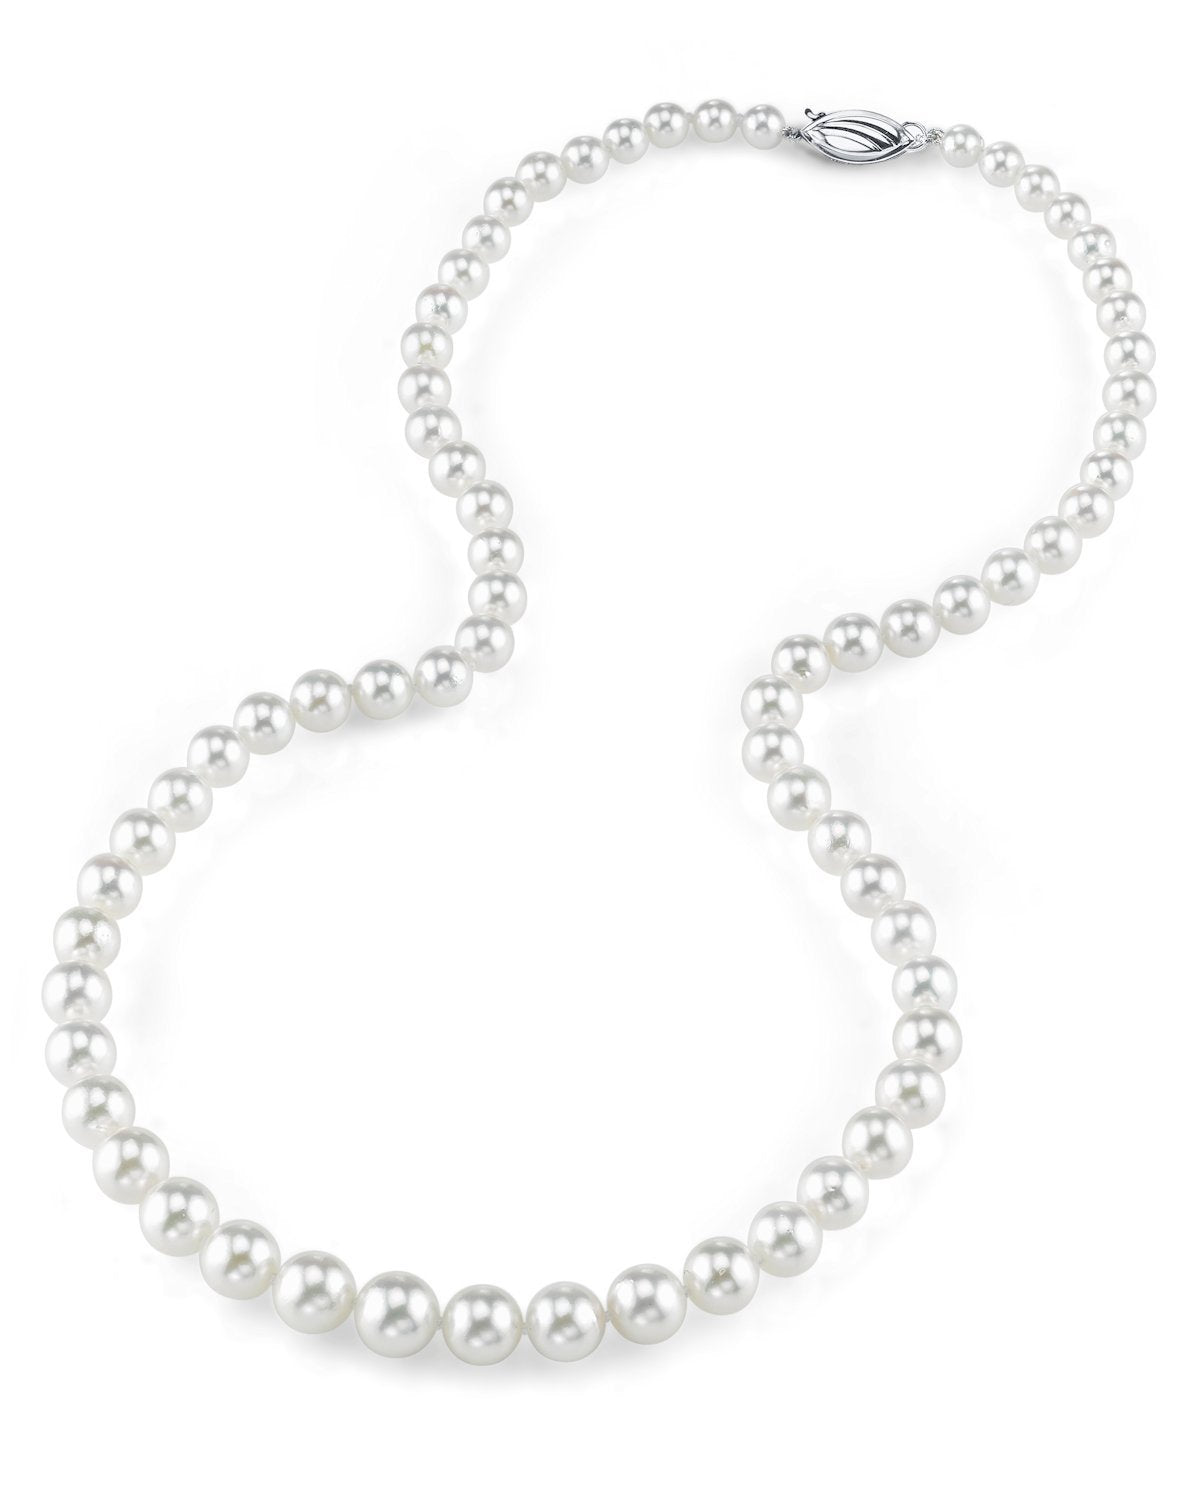 Ziegfeld Collection Pearl Necklace with a Silver Clasp, 6-7 mm